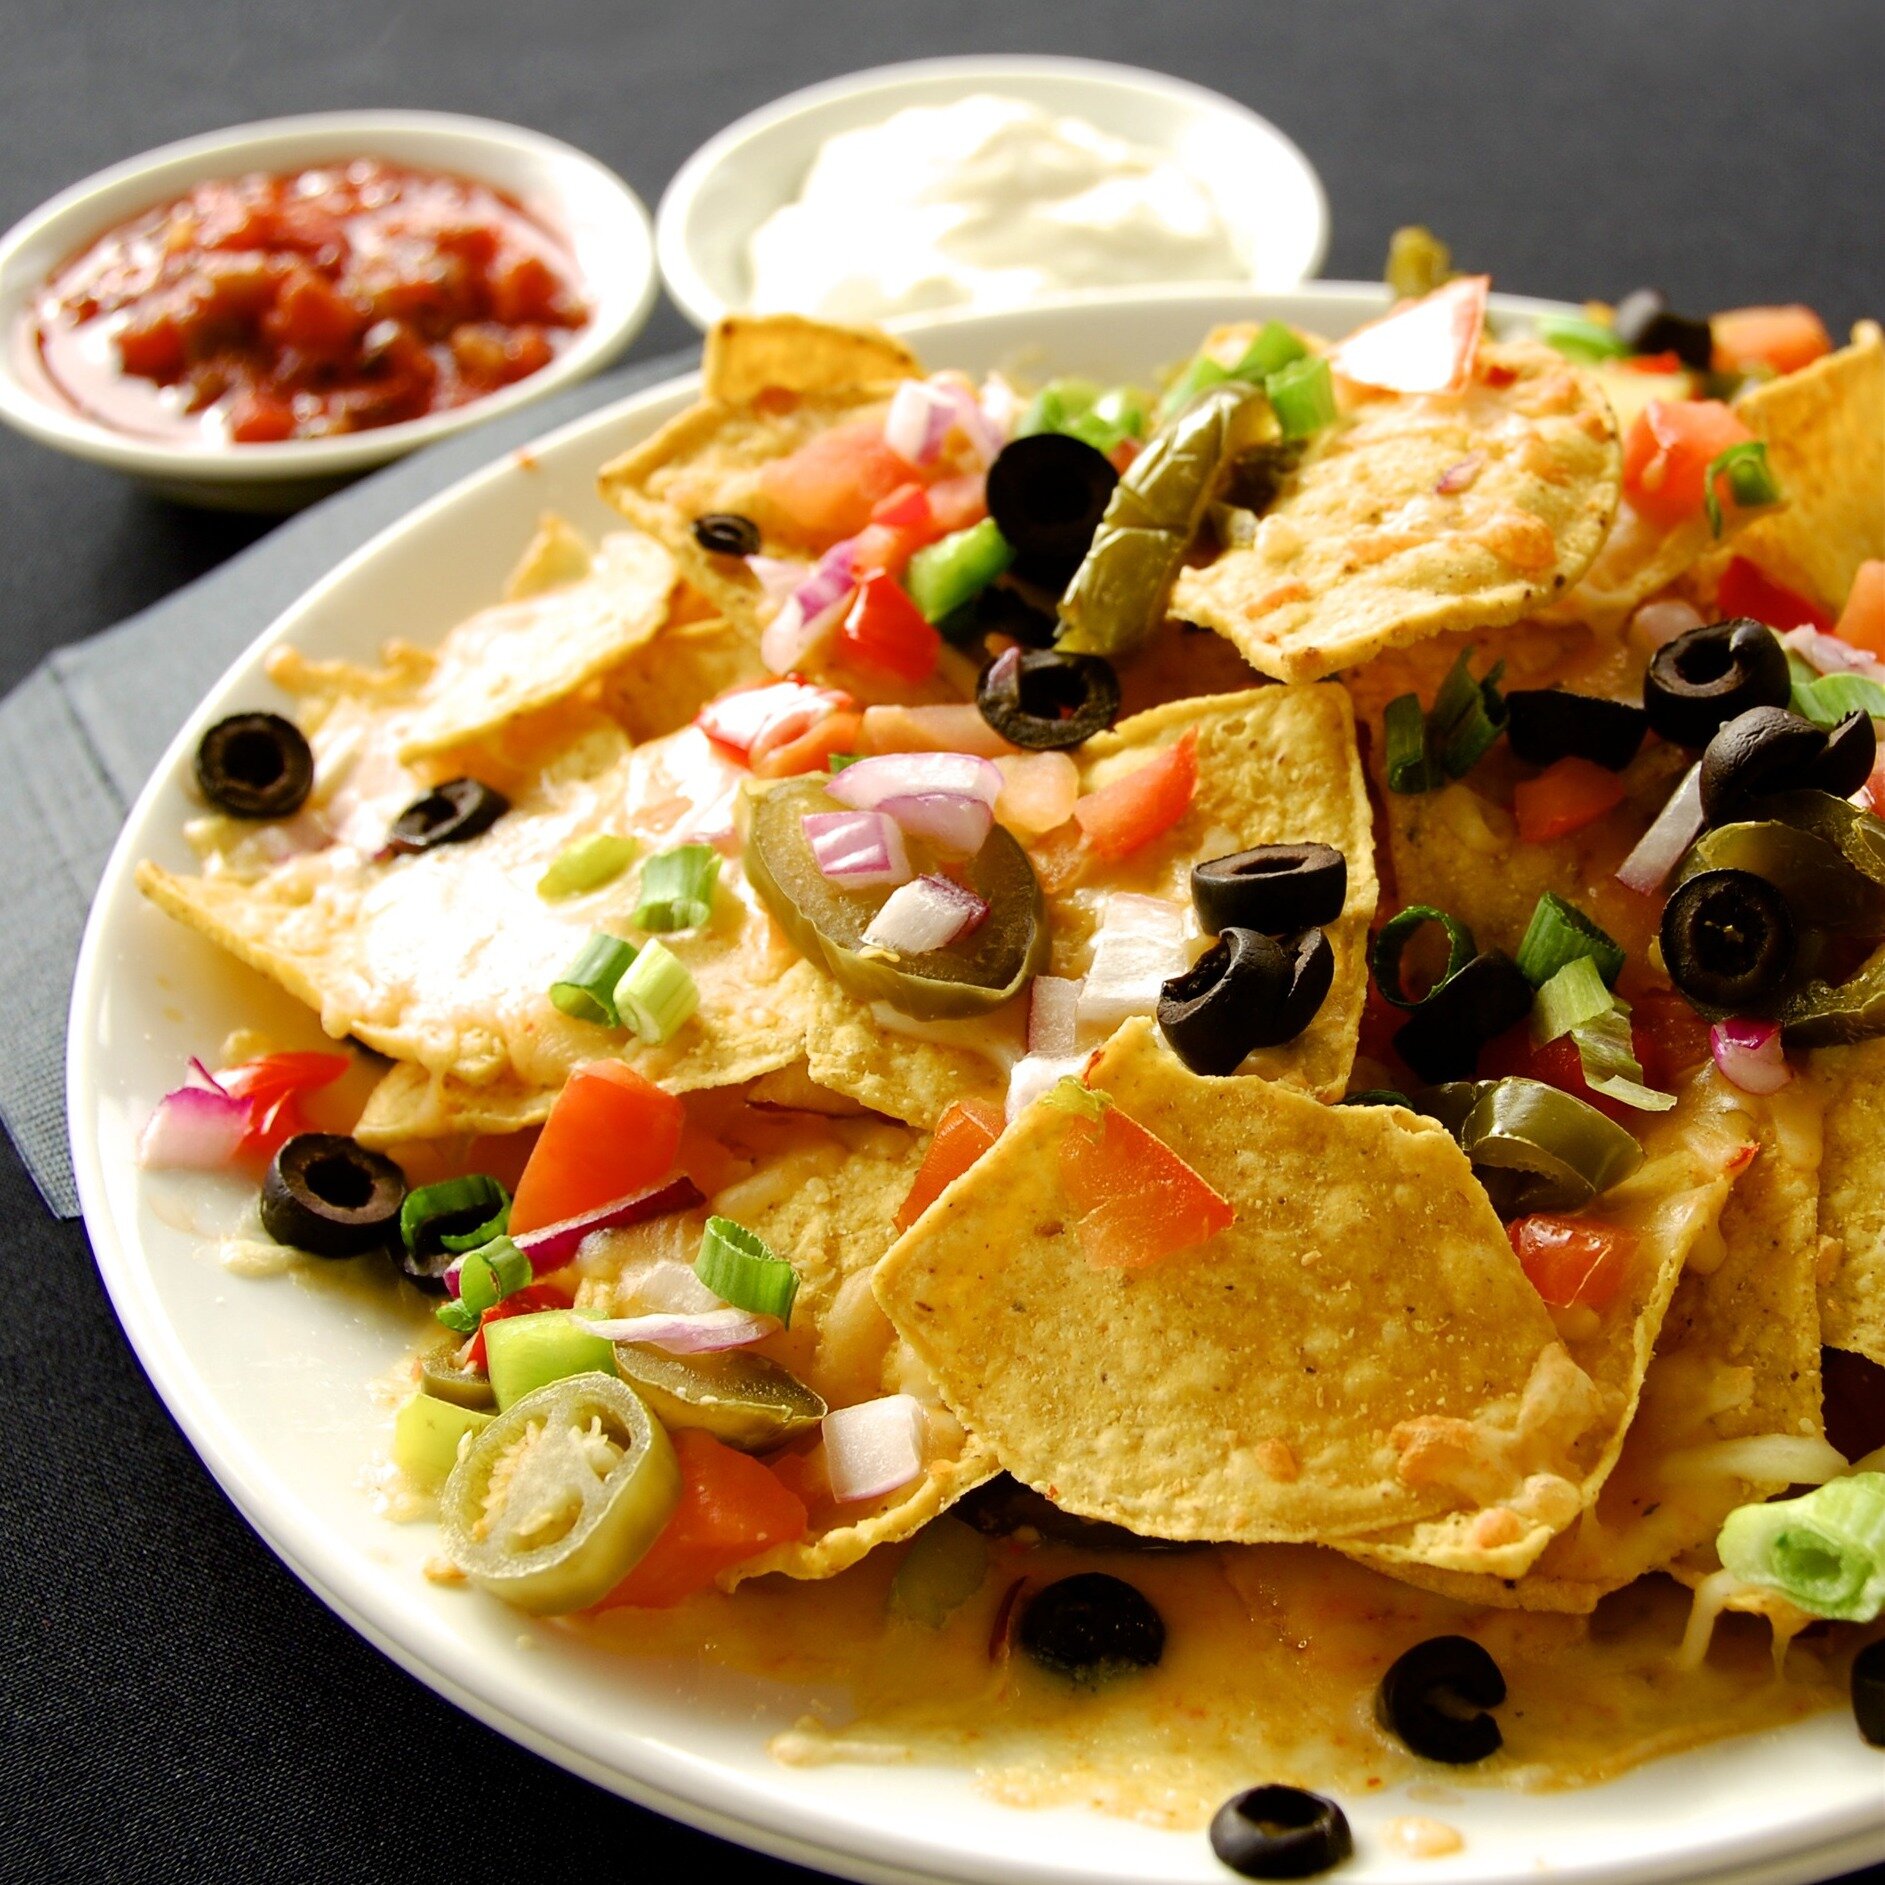 Join us for lunch or dinner and enjoy TC's Pub's popular Oven-baked Nachos! 
House-made chips oven baked with cheese and topped with jalape&ntilde;o, black olives, bell peppers, green onions &amp; tomatoes. Served with fire roasted salsa &amp; sour c